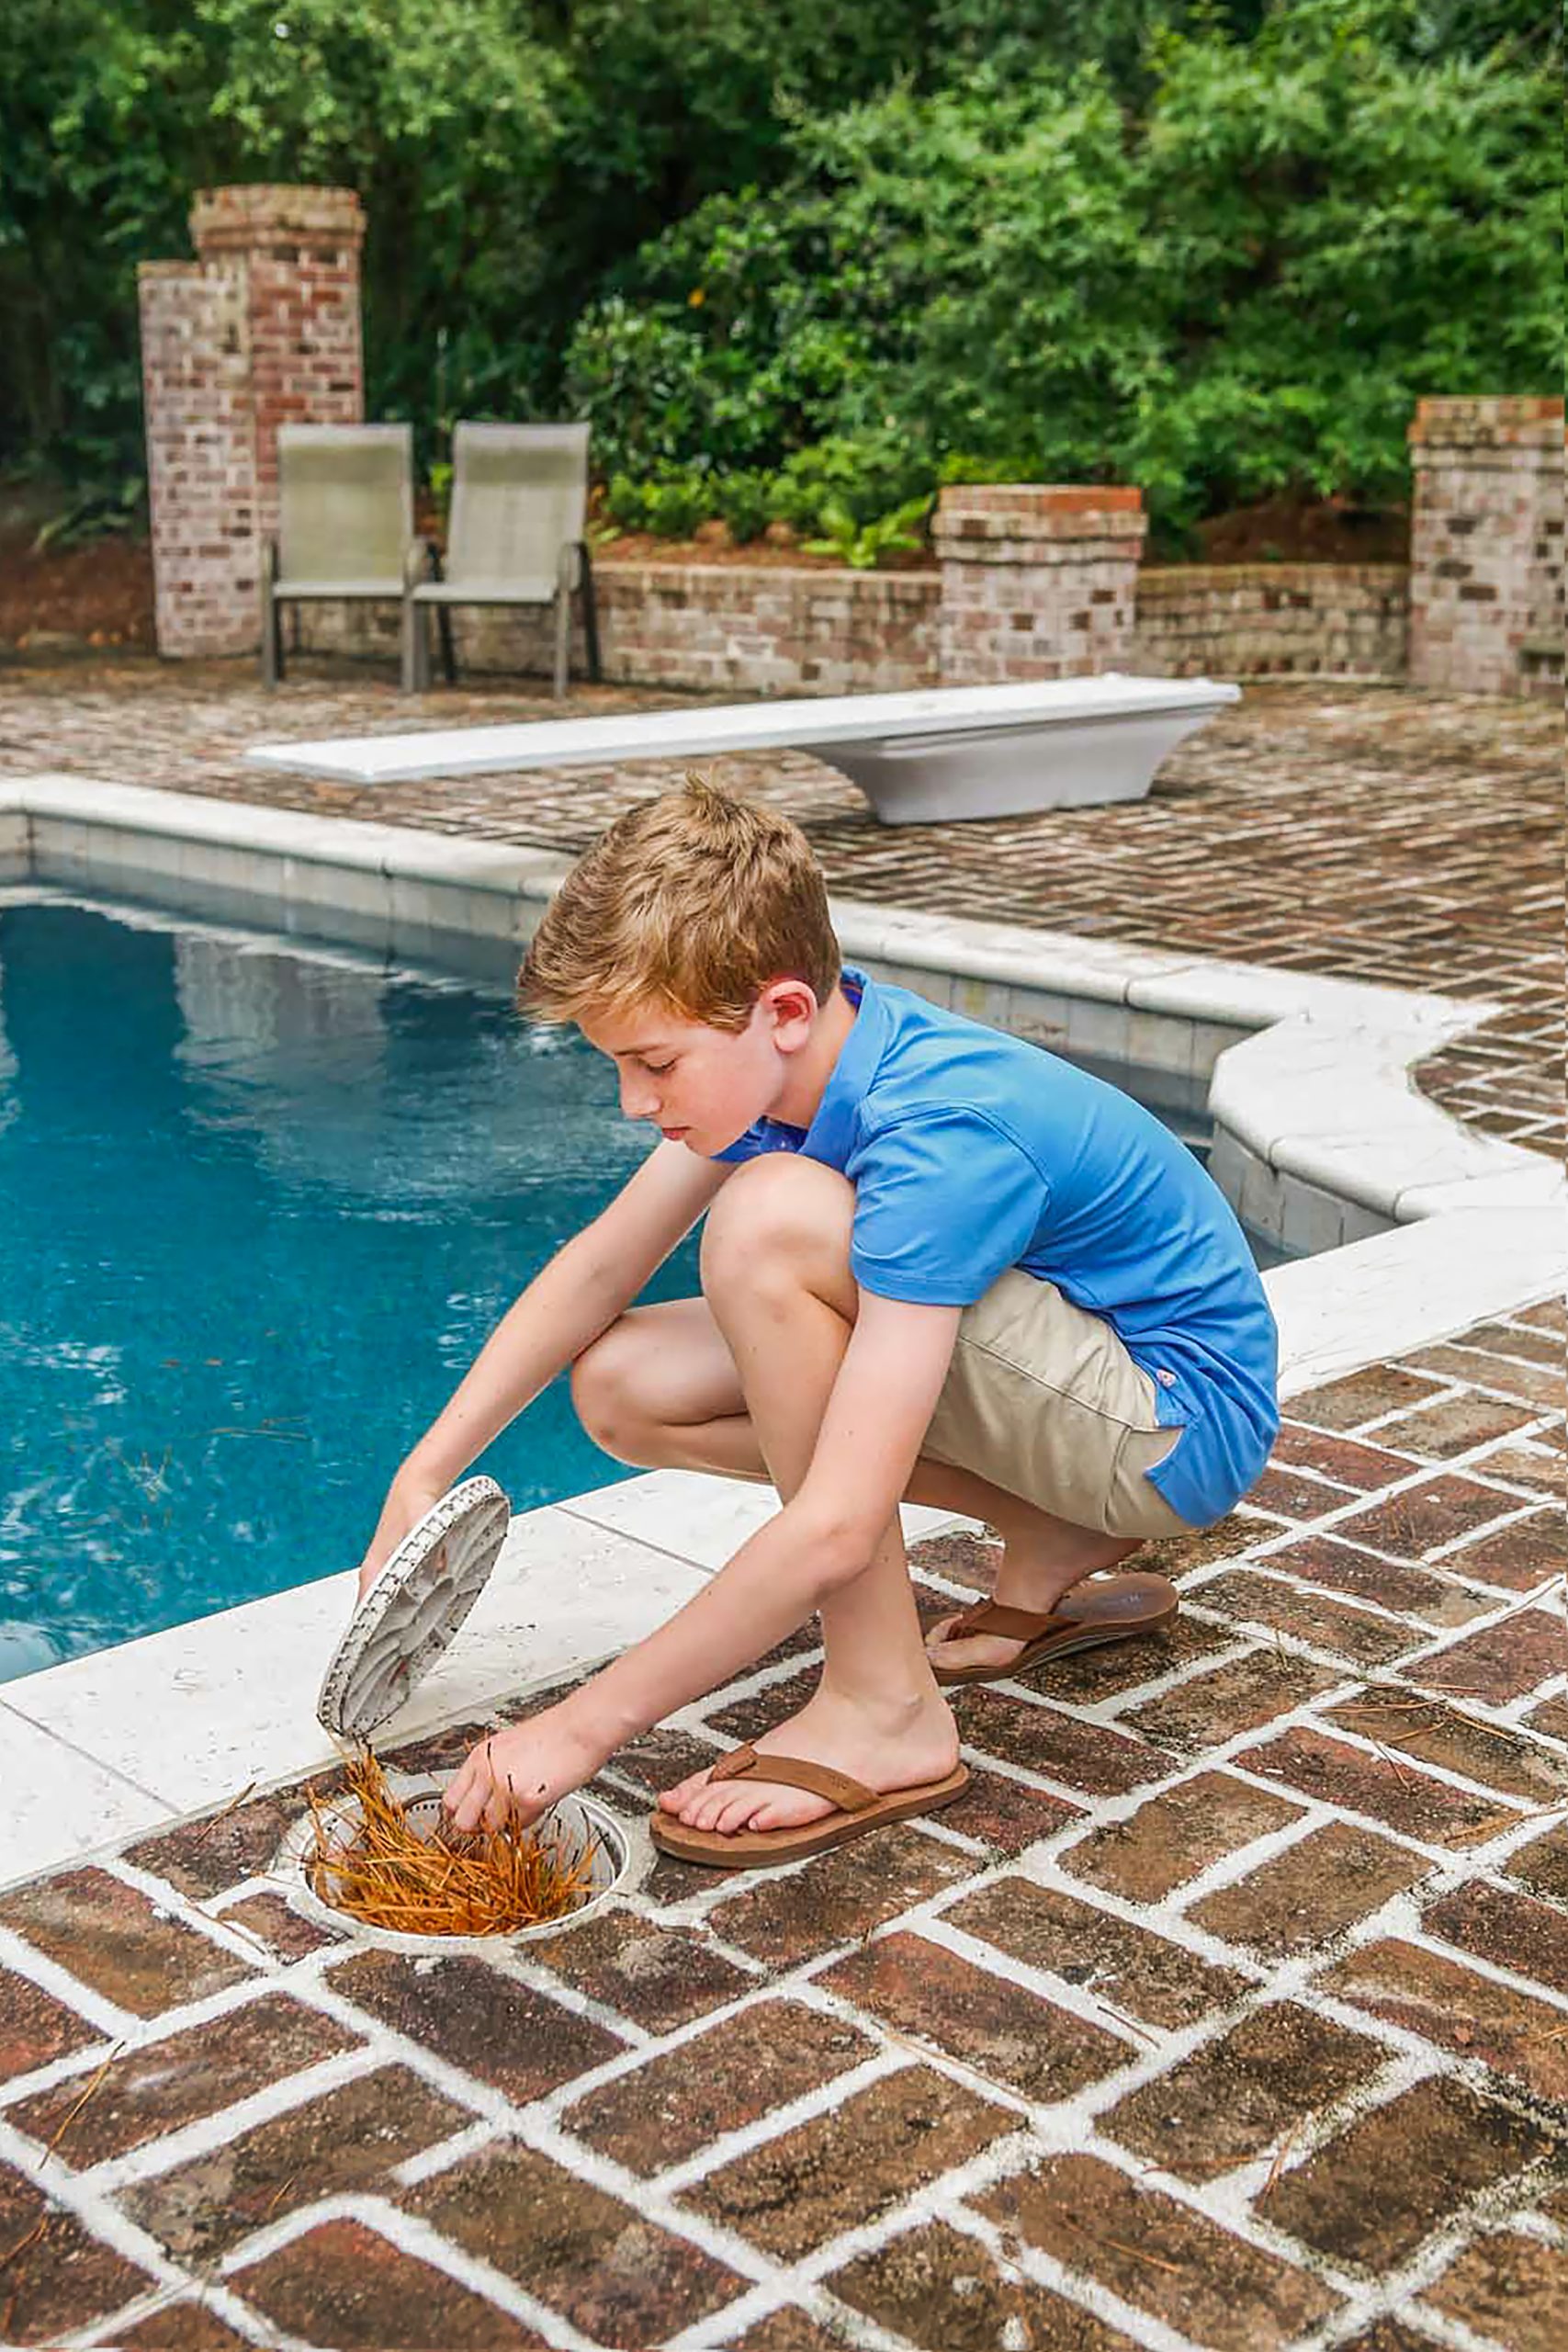 Even before the Cohns had their own pool, Tripp, 11, always loved to help “clean” a pool with the long brush or net. “He doesn’t always do it perfectly, but letting him help when he was little instilled a sense of responsibility in him that is incredibly helpful now that he is a pre-teen.” Brooke says. “I’m especially appreciative that he has taken on the responsibility of cleaning out the skimmer baskets, as I’m terrified of creepy crawlies! I think it makes him feel important to have a chore that he knows means so much to me.”